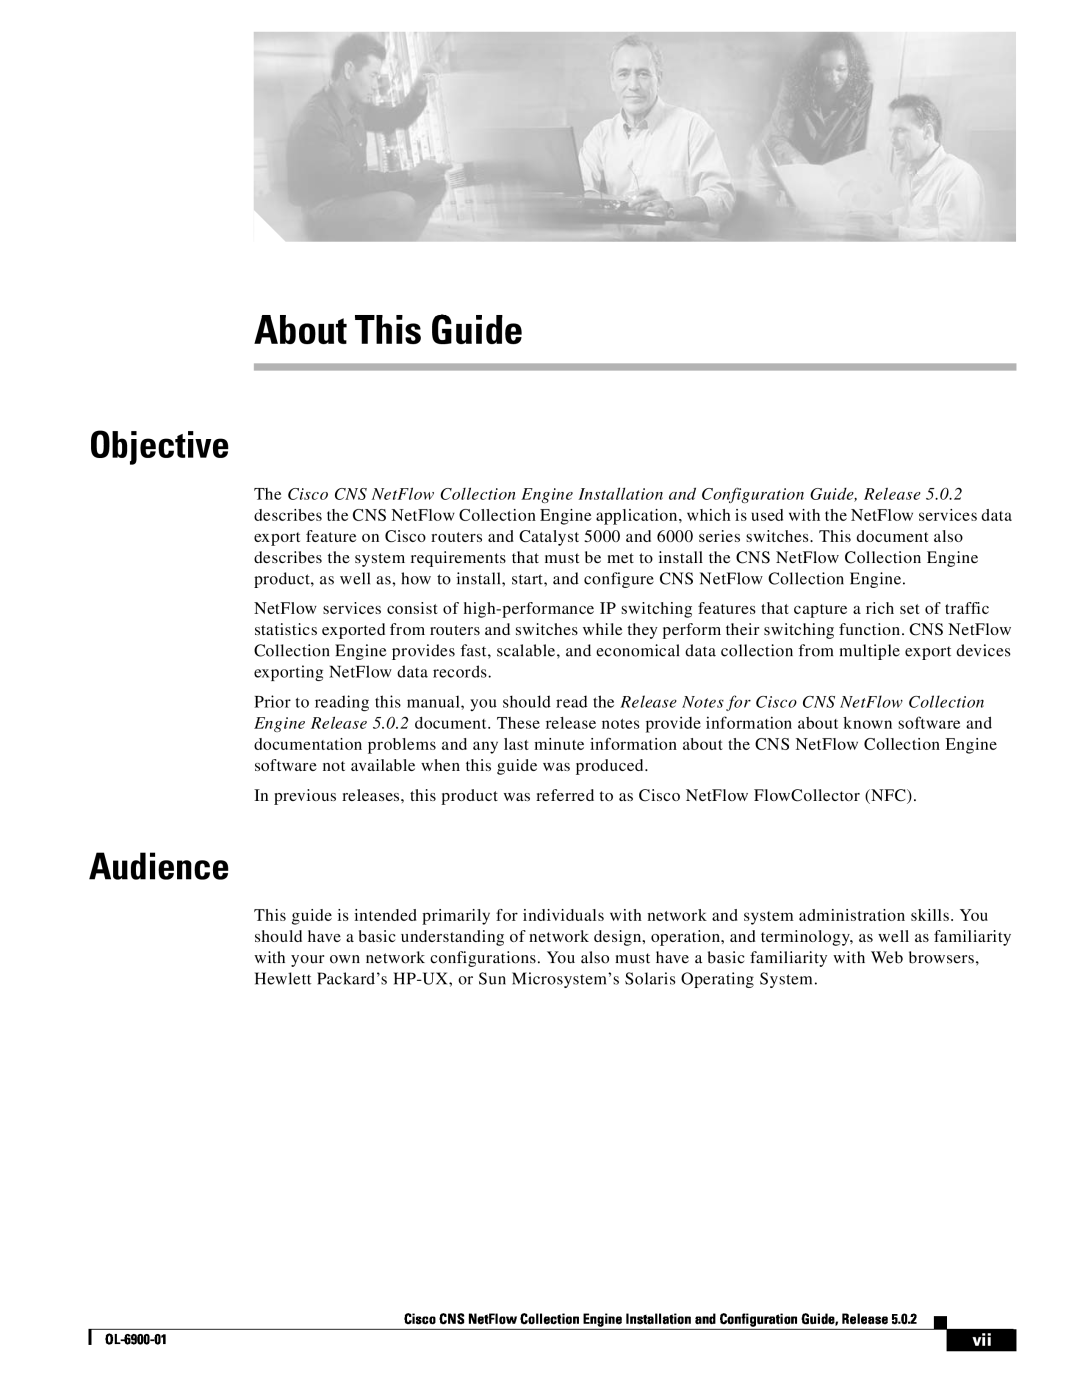 Cisco Systems OL-6900-01 manual About This Guide, Objective, Audience 